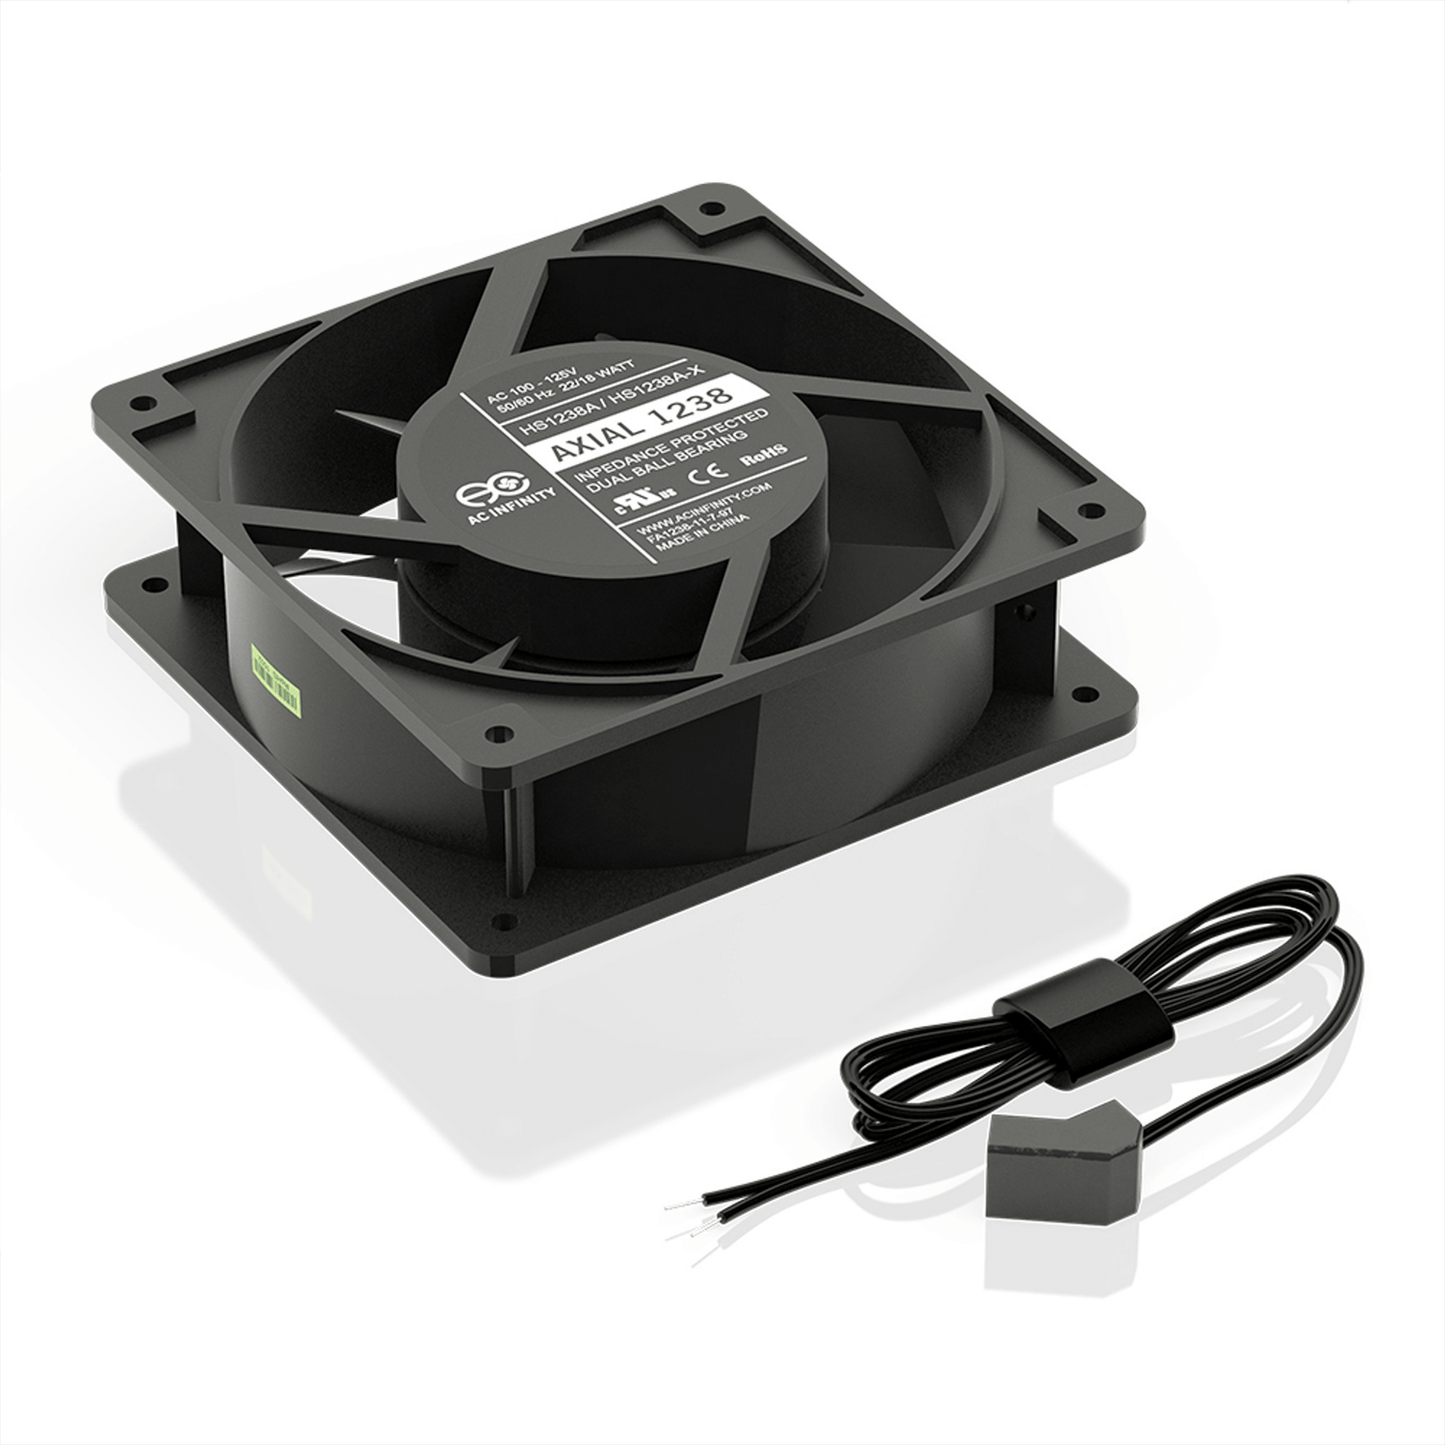 AC Infinity AXIAL 1238W, 120V AC Muffin Fan with Wire-Leads Adapter, 120mm x 38mm High Speed | HS1238A-W | Grow Tents Depot | Climate Control | 854759004280